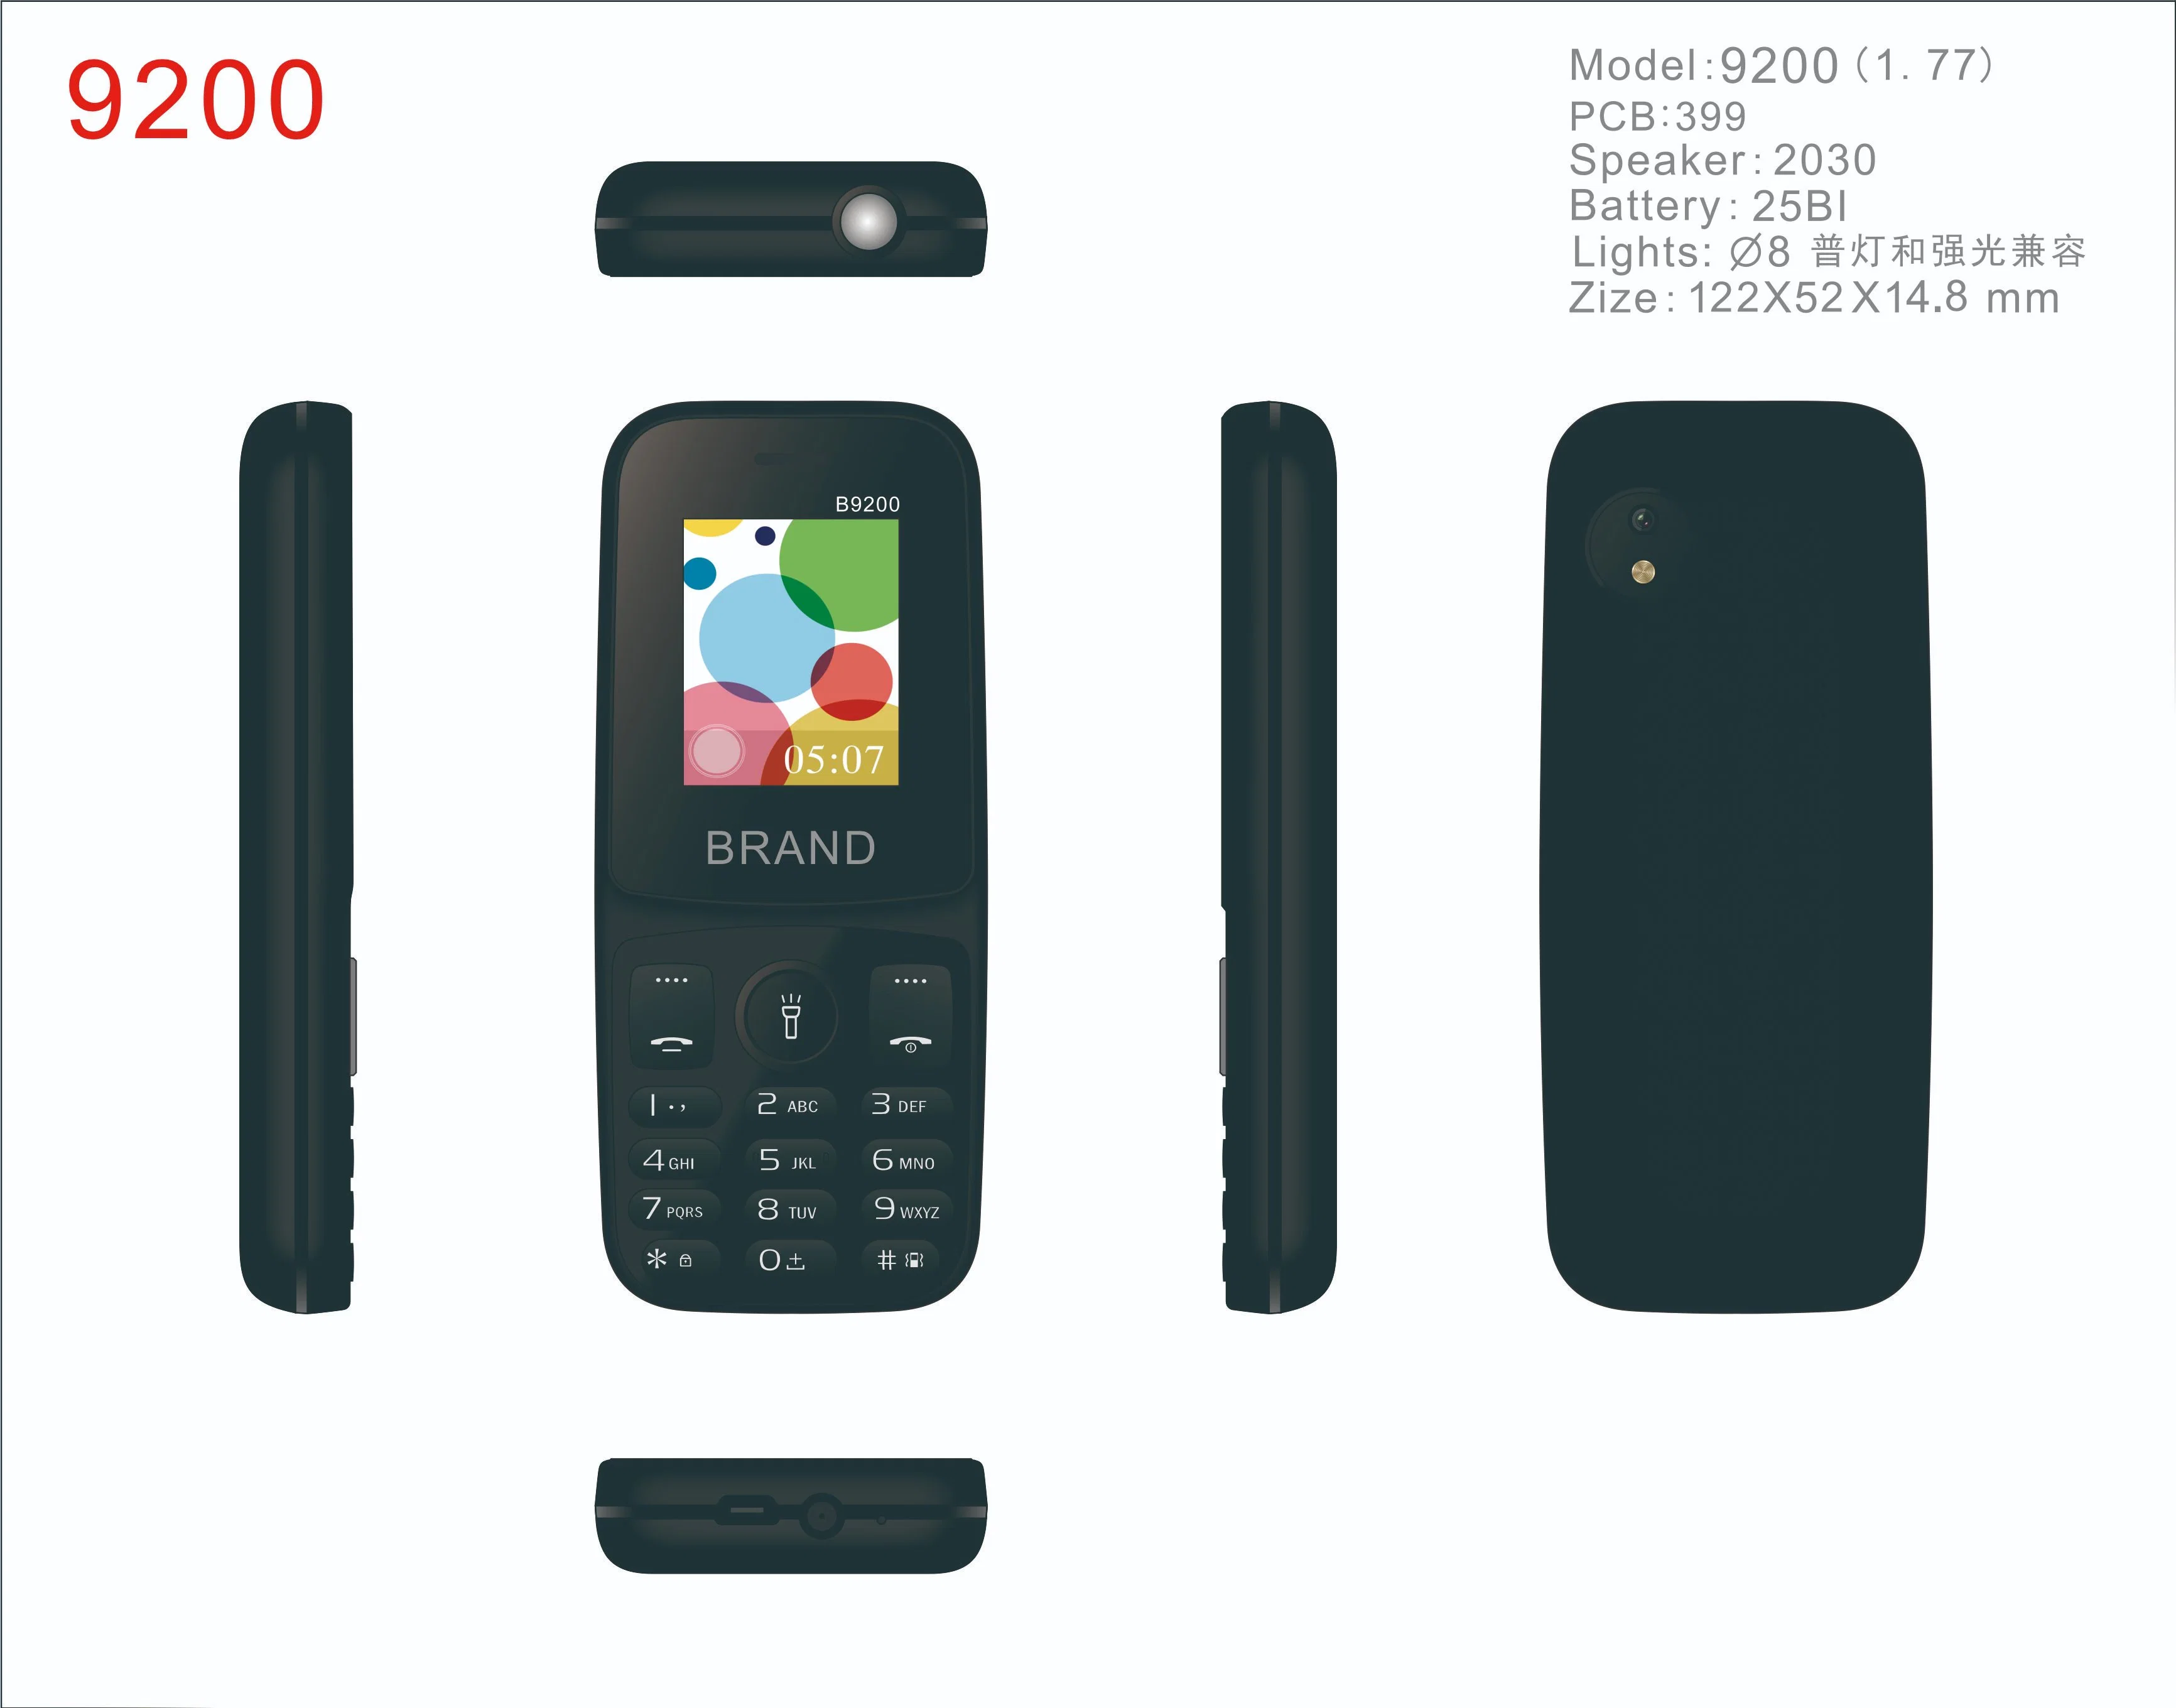 Mobile Slim Bar Phone Feature Phone with Good Price